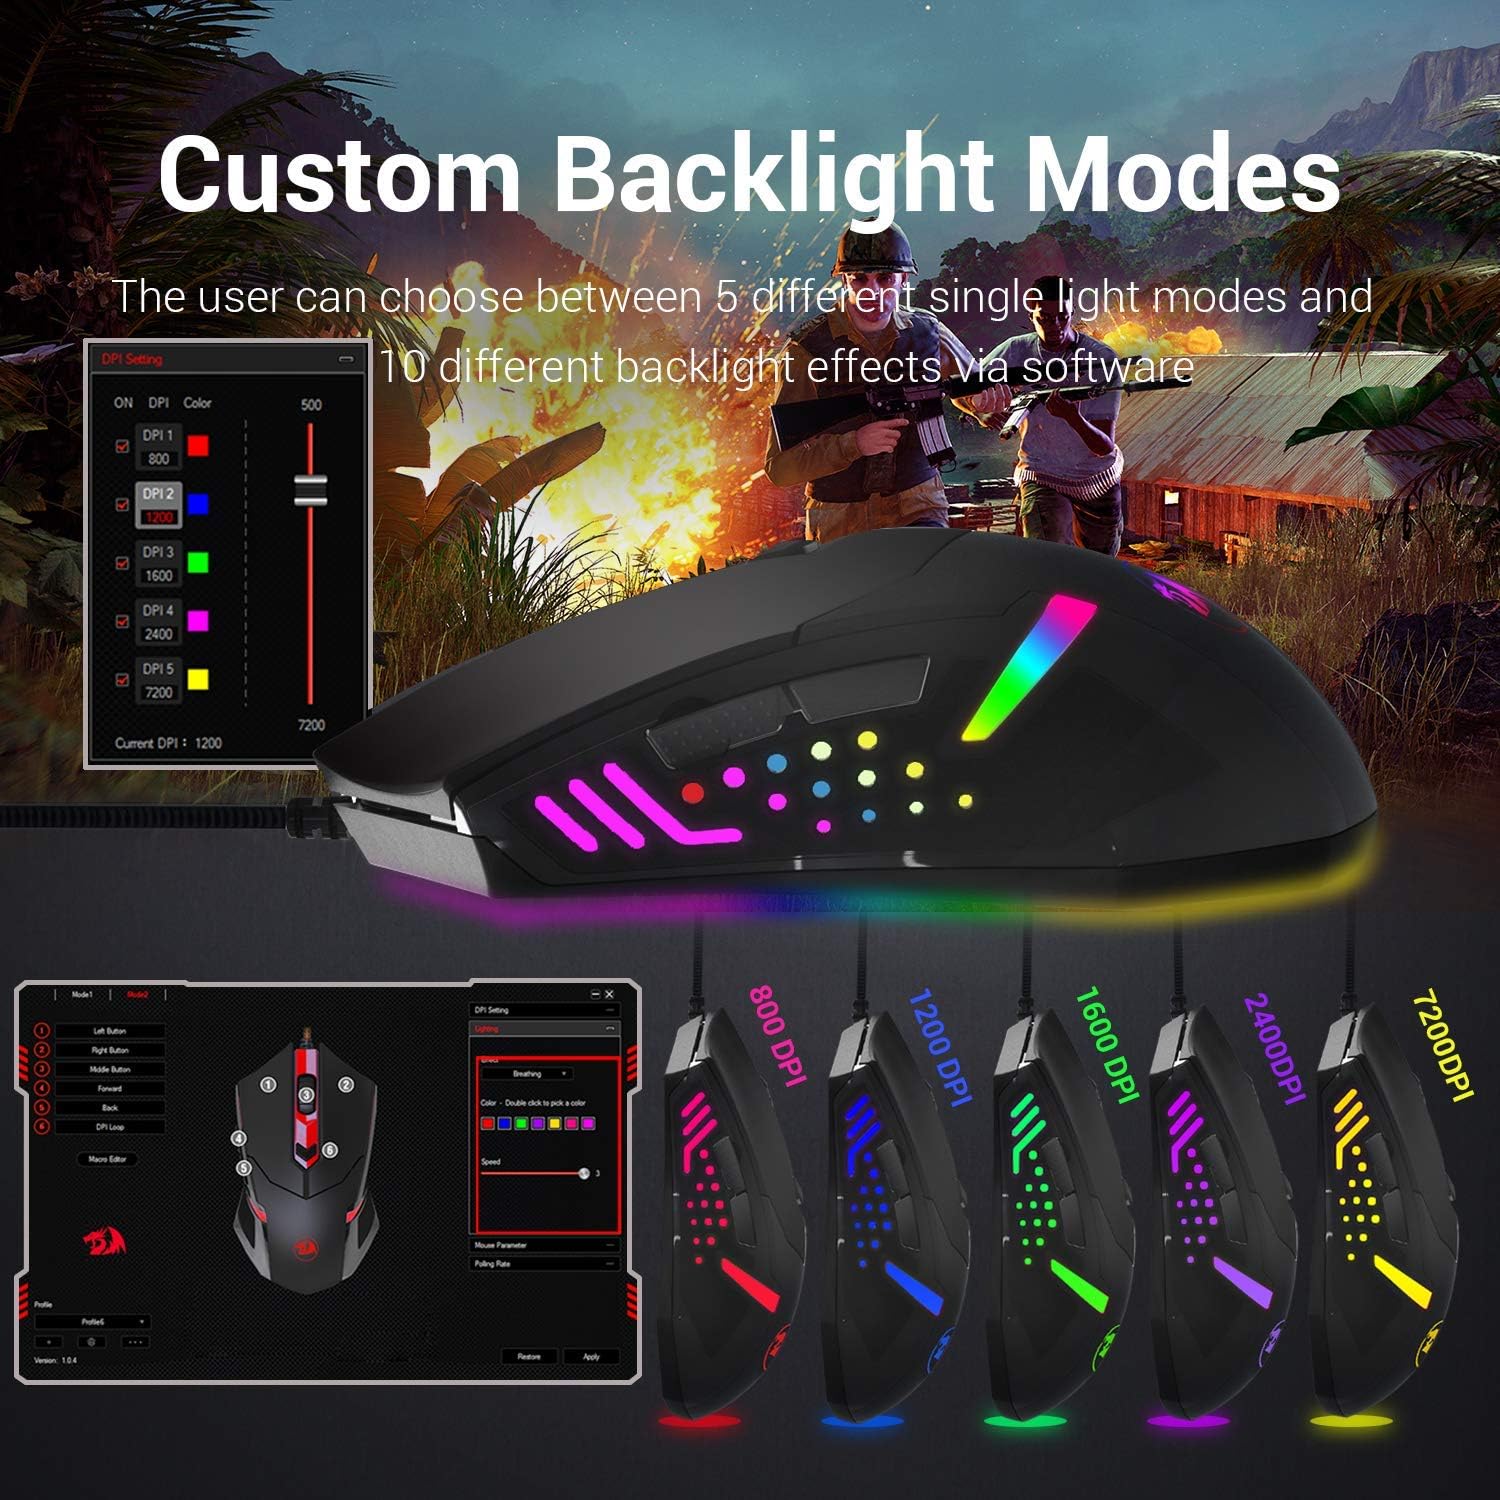 Redragon M601 Gaming Mouse Wired with red led, 3200 DPI 6 Buttons Ergonomic CENTROPHORUS Gaming Mouse for PC